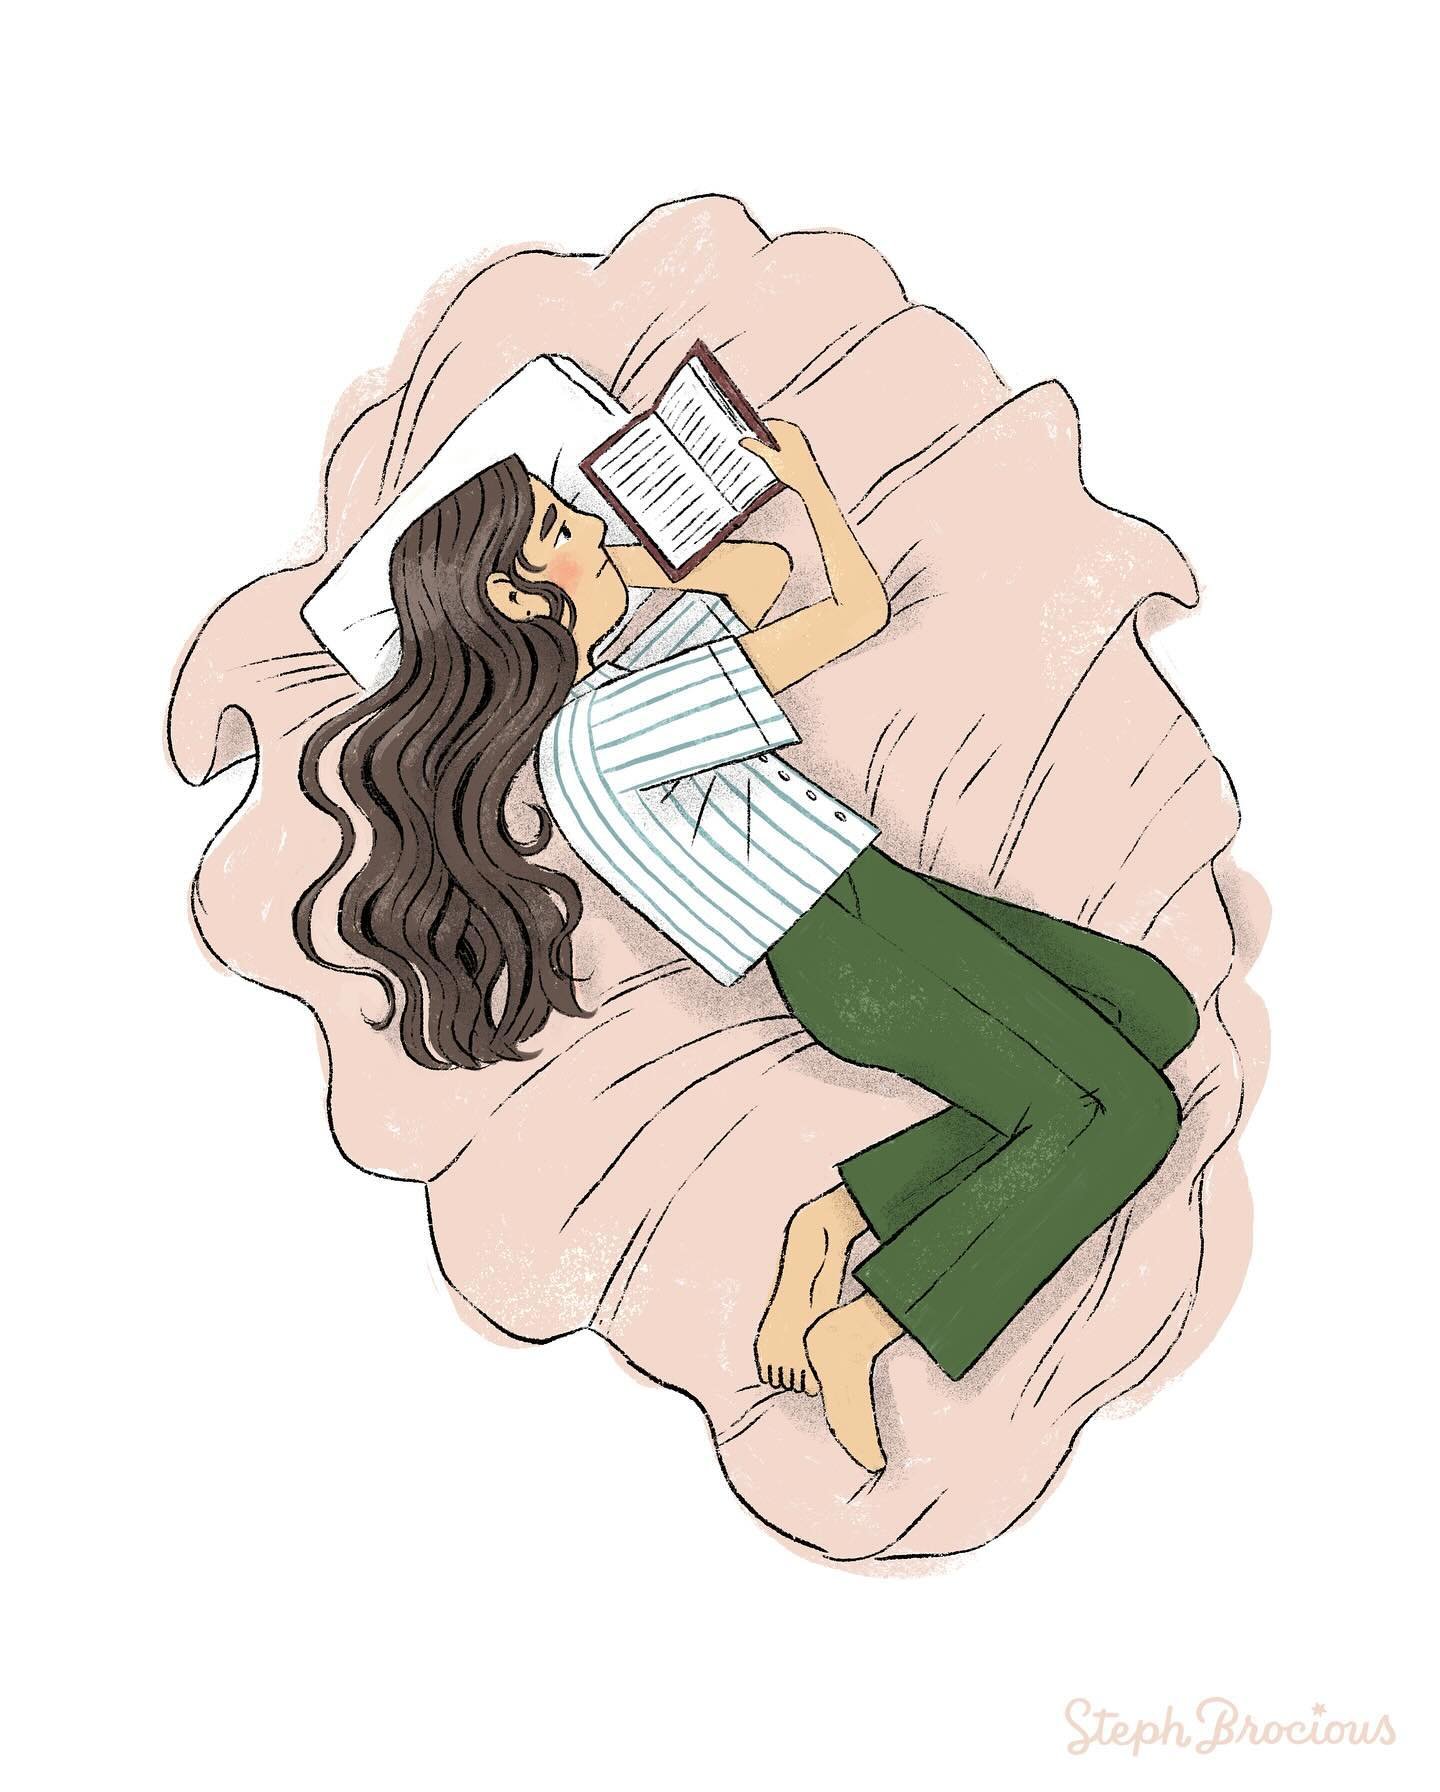 Sometimes you just need to relax with a good book. What are some good books you&rsquo;ve read lately? 

#illustration #readabook #characterdesign #illustrationartist #kidlitillustration #illustratorforhire #illustrationgram